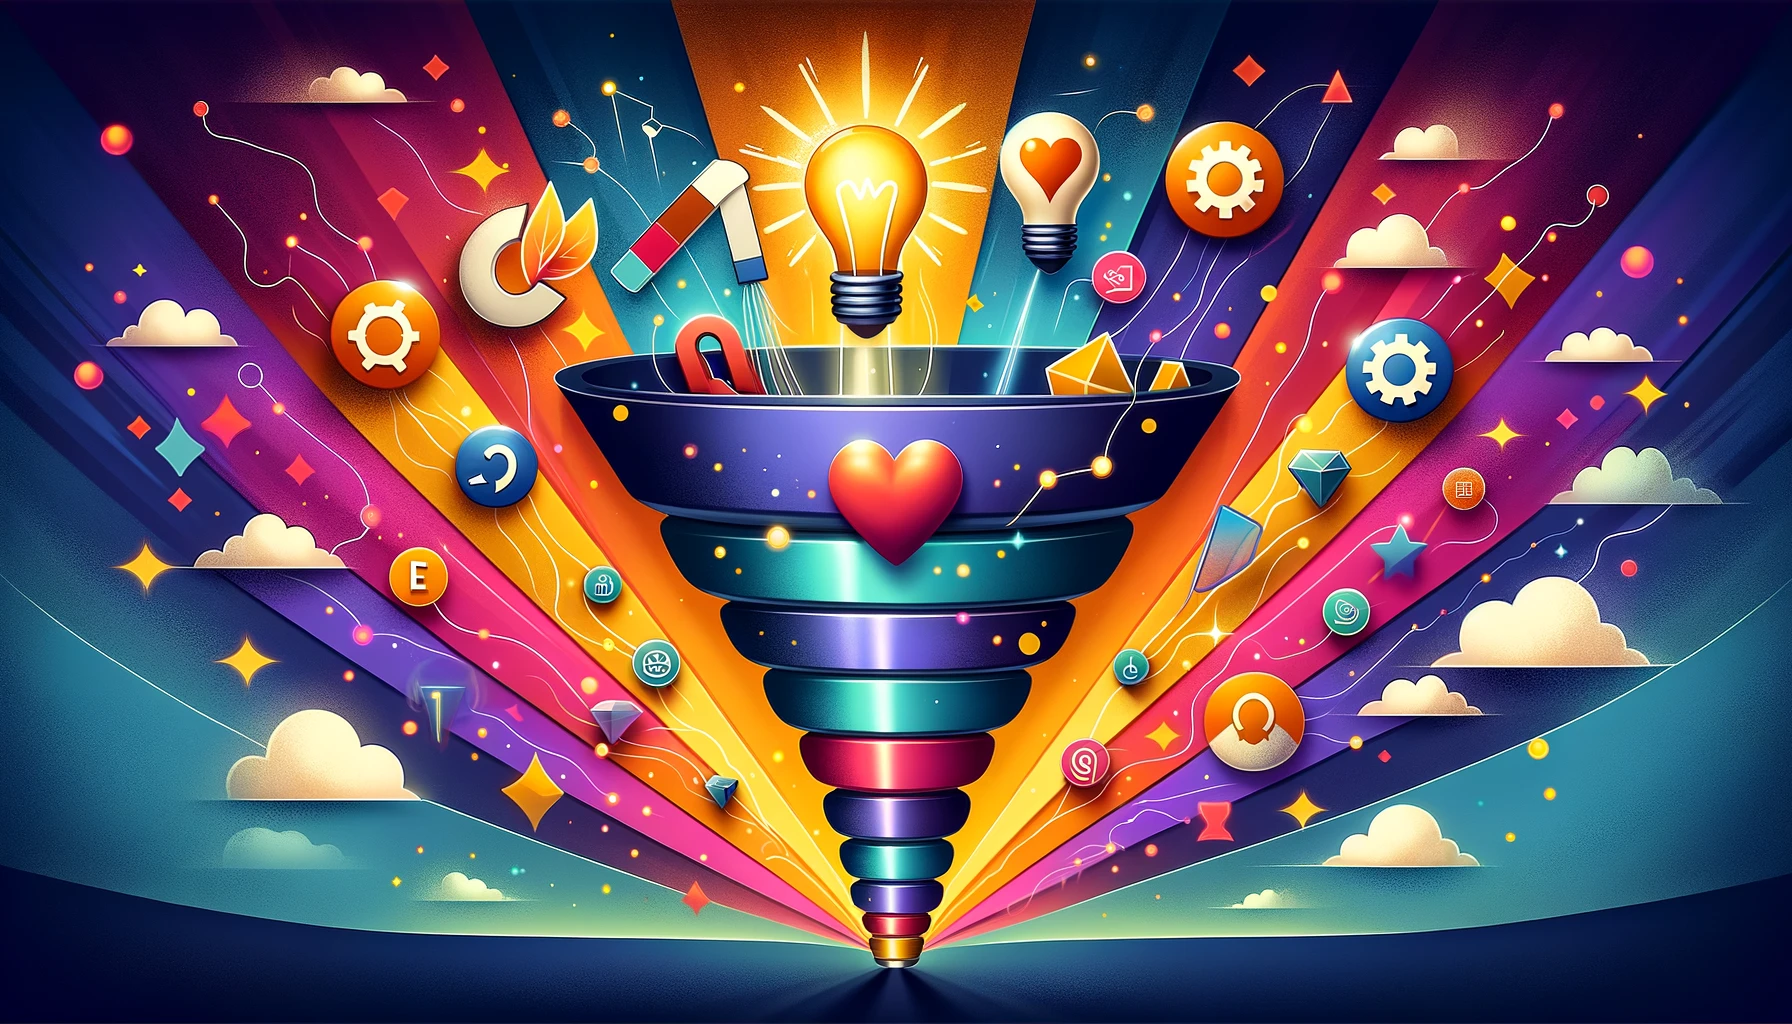 Abstract representation of the lead funnel management process, featuring segmented stages filled with icons such as a magnet, dialogue bubble, light bulb, and heart, symbolizing attraction, engagement, insight, and relationship building.